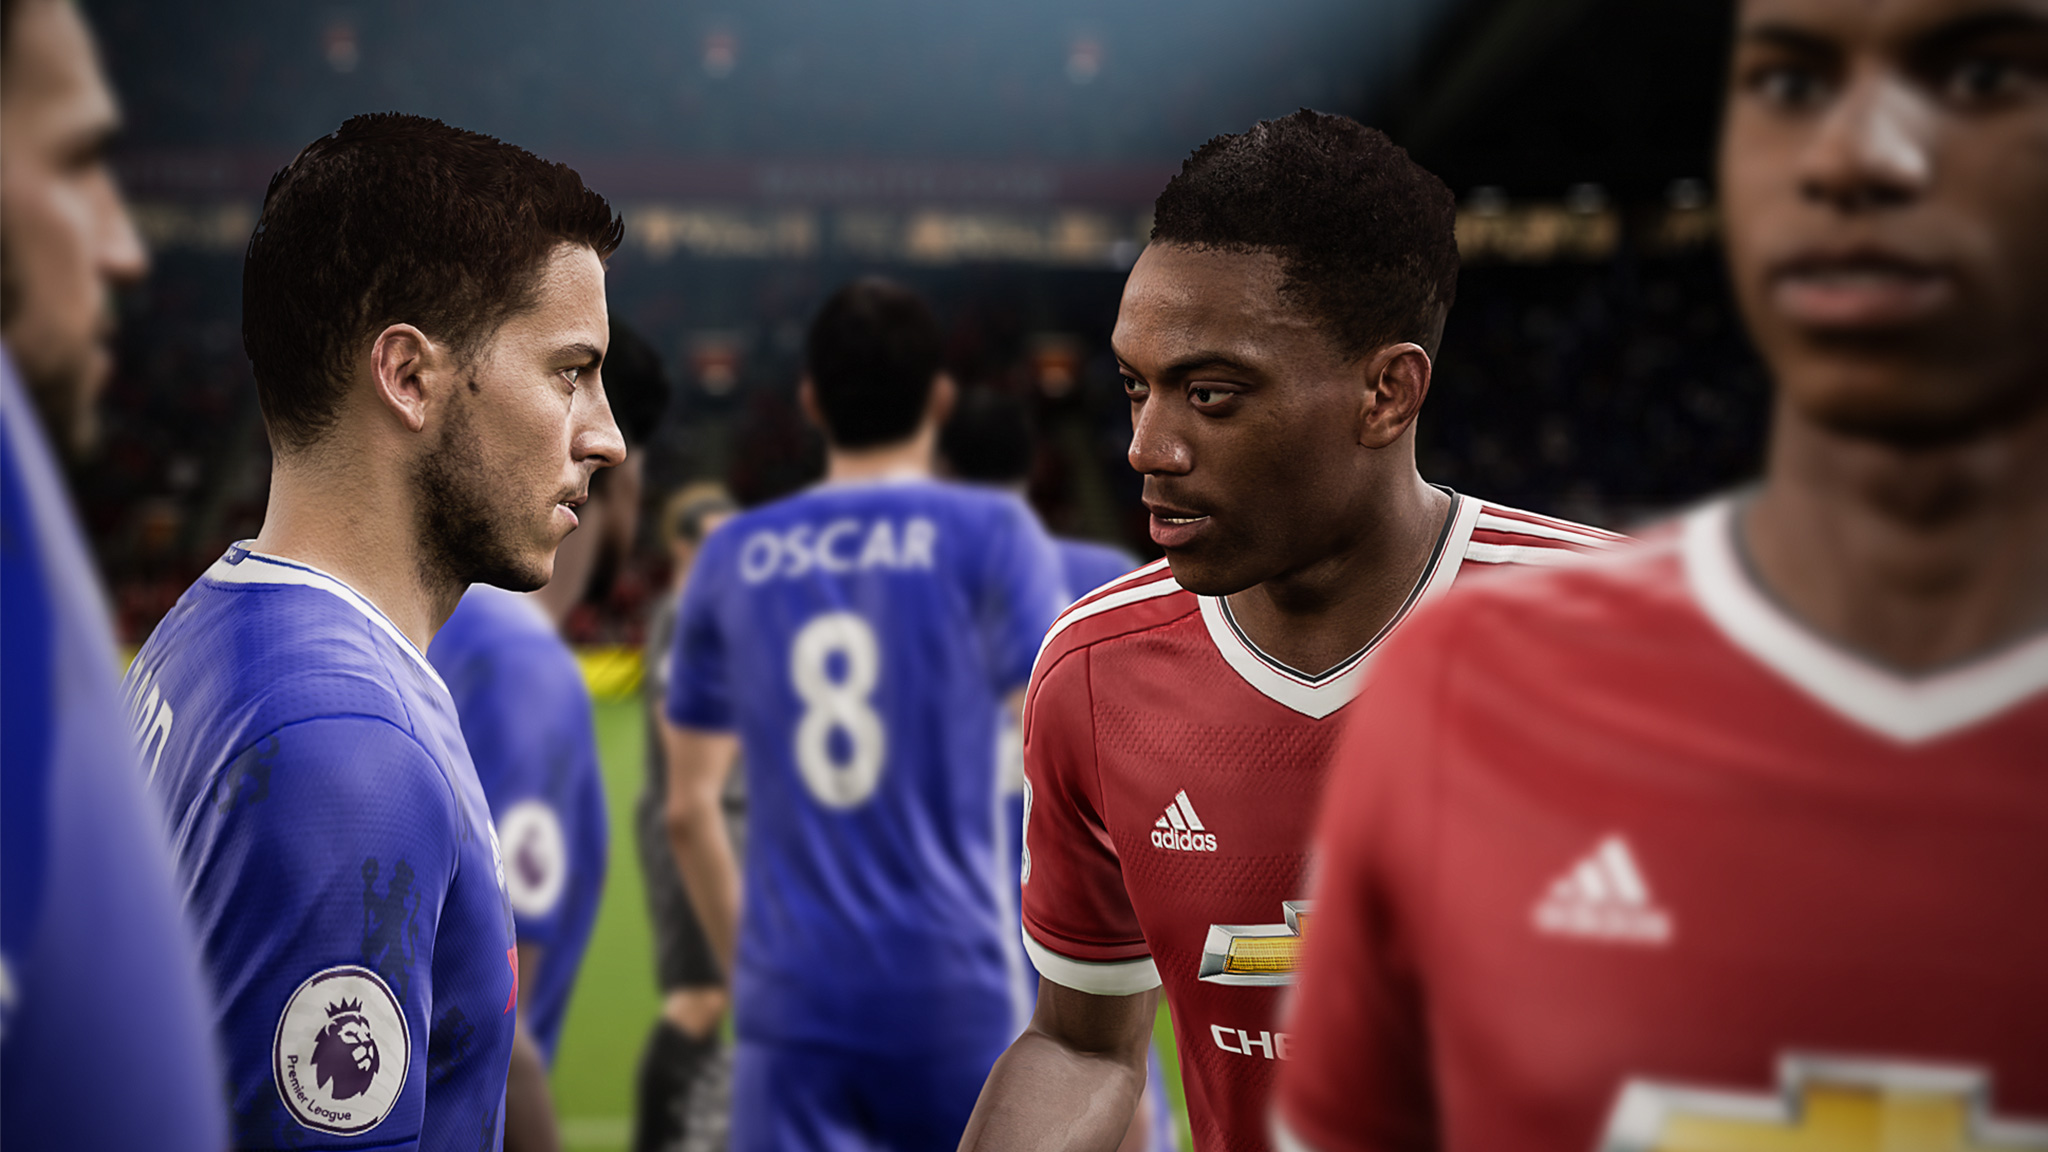 New FIFA ambassador's Anthony Martial and Eden Hazard meet on the pitch